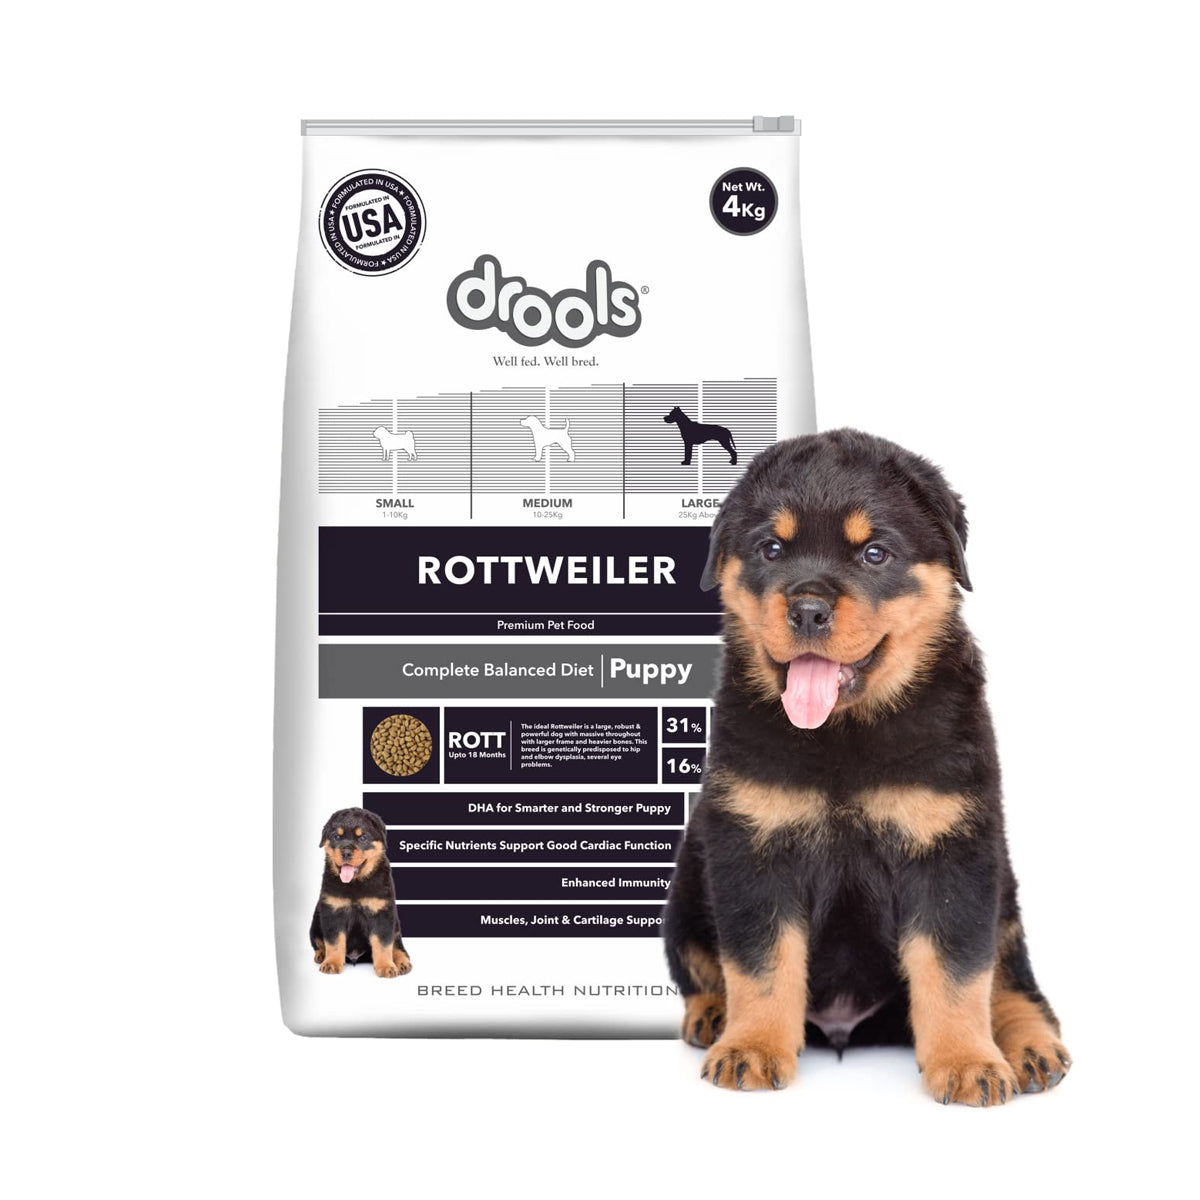 how much does a rottweiler puppy cost in india